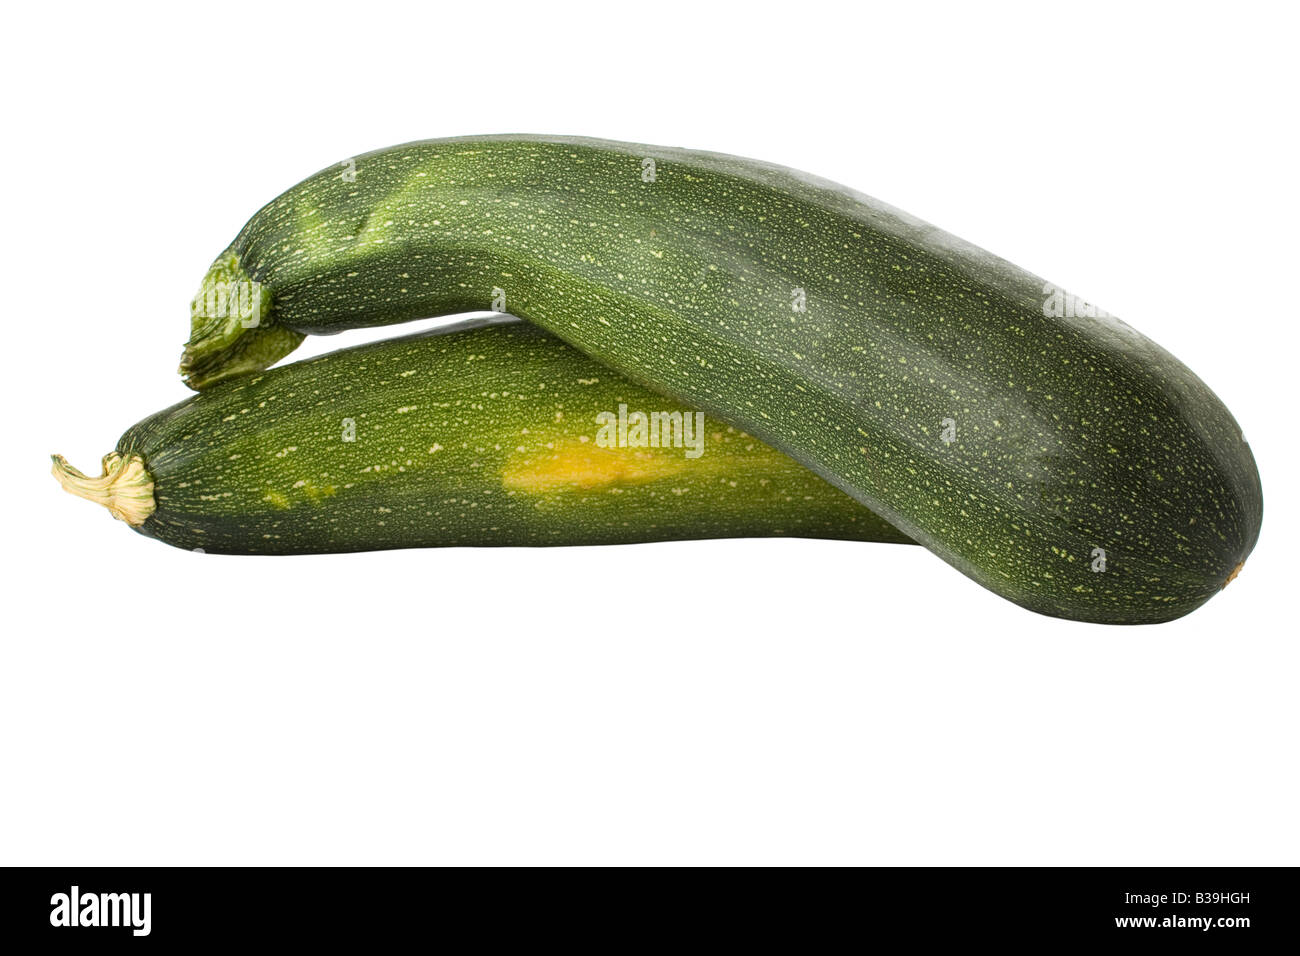 Ripe zucchinis or courgettes isolated on a white background Stock Photo